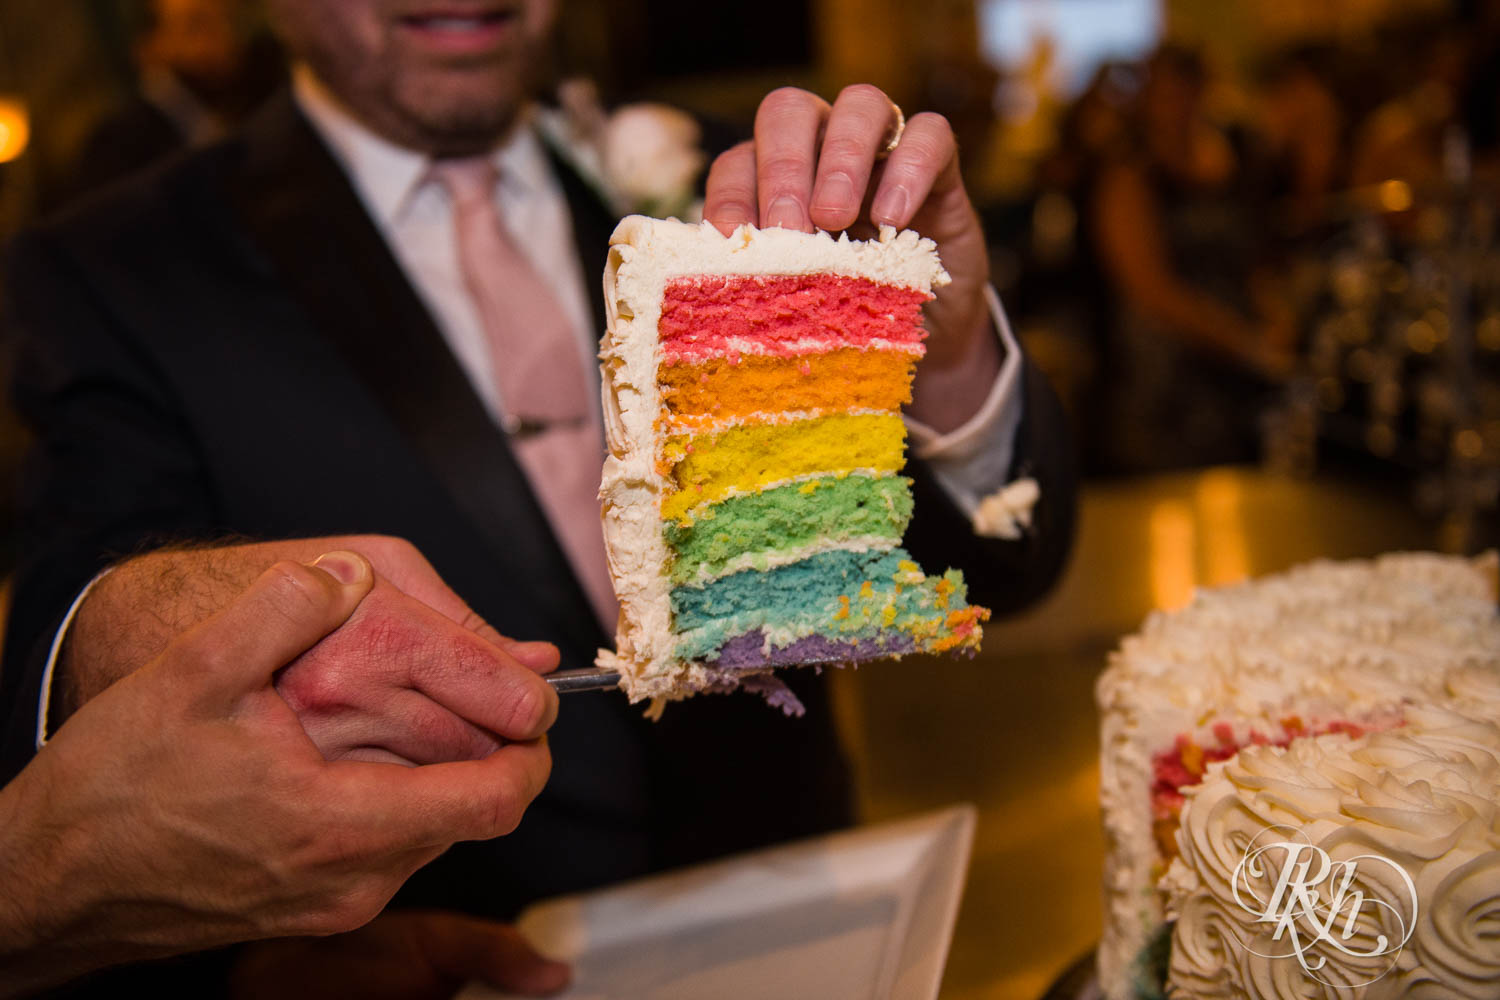 Grooms cut cake during wedding reception speeches at Warehouse Winery wedding in Saint Louis Park, Minnesota.